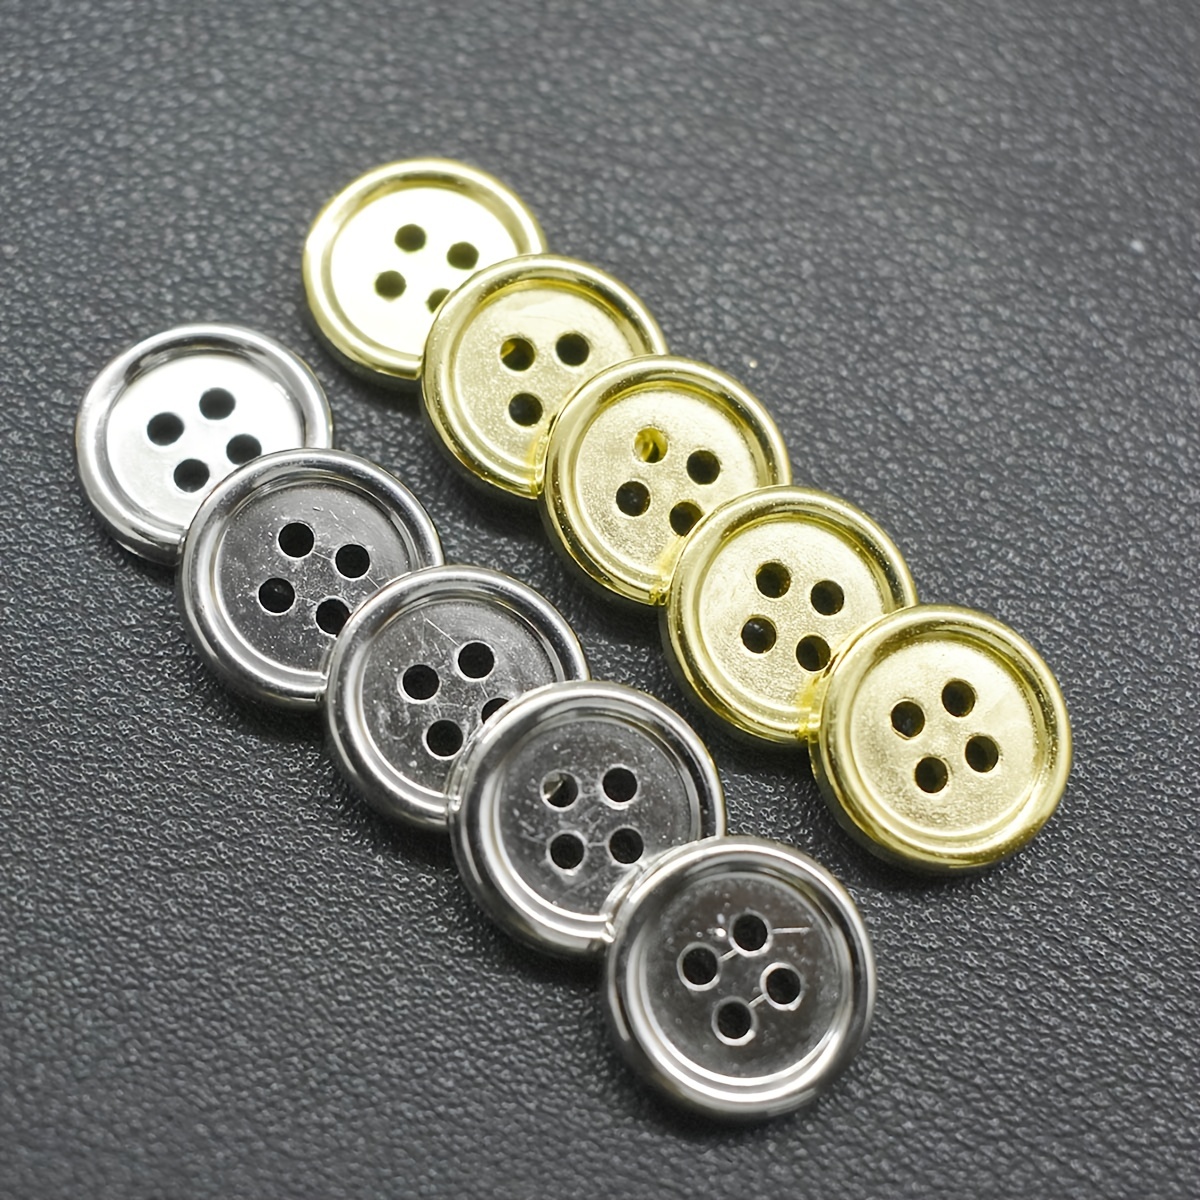 Heart-shaped Oversize Metal Clothes Buttons Women Jackets Shirts Cuff  Overcoat Fashion DIY Craft Sewing Buttons Accessories 6Pcs